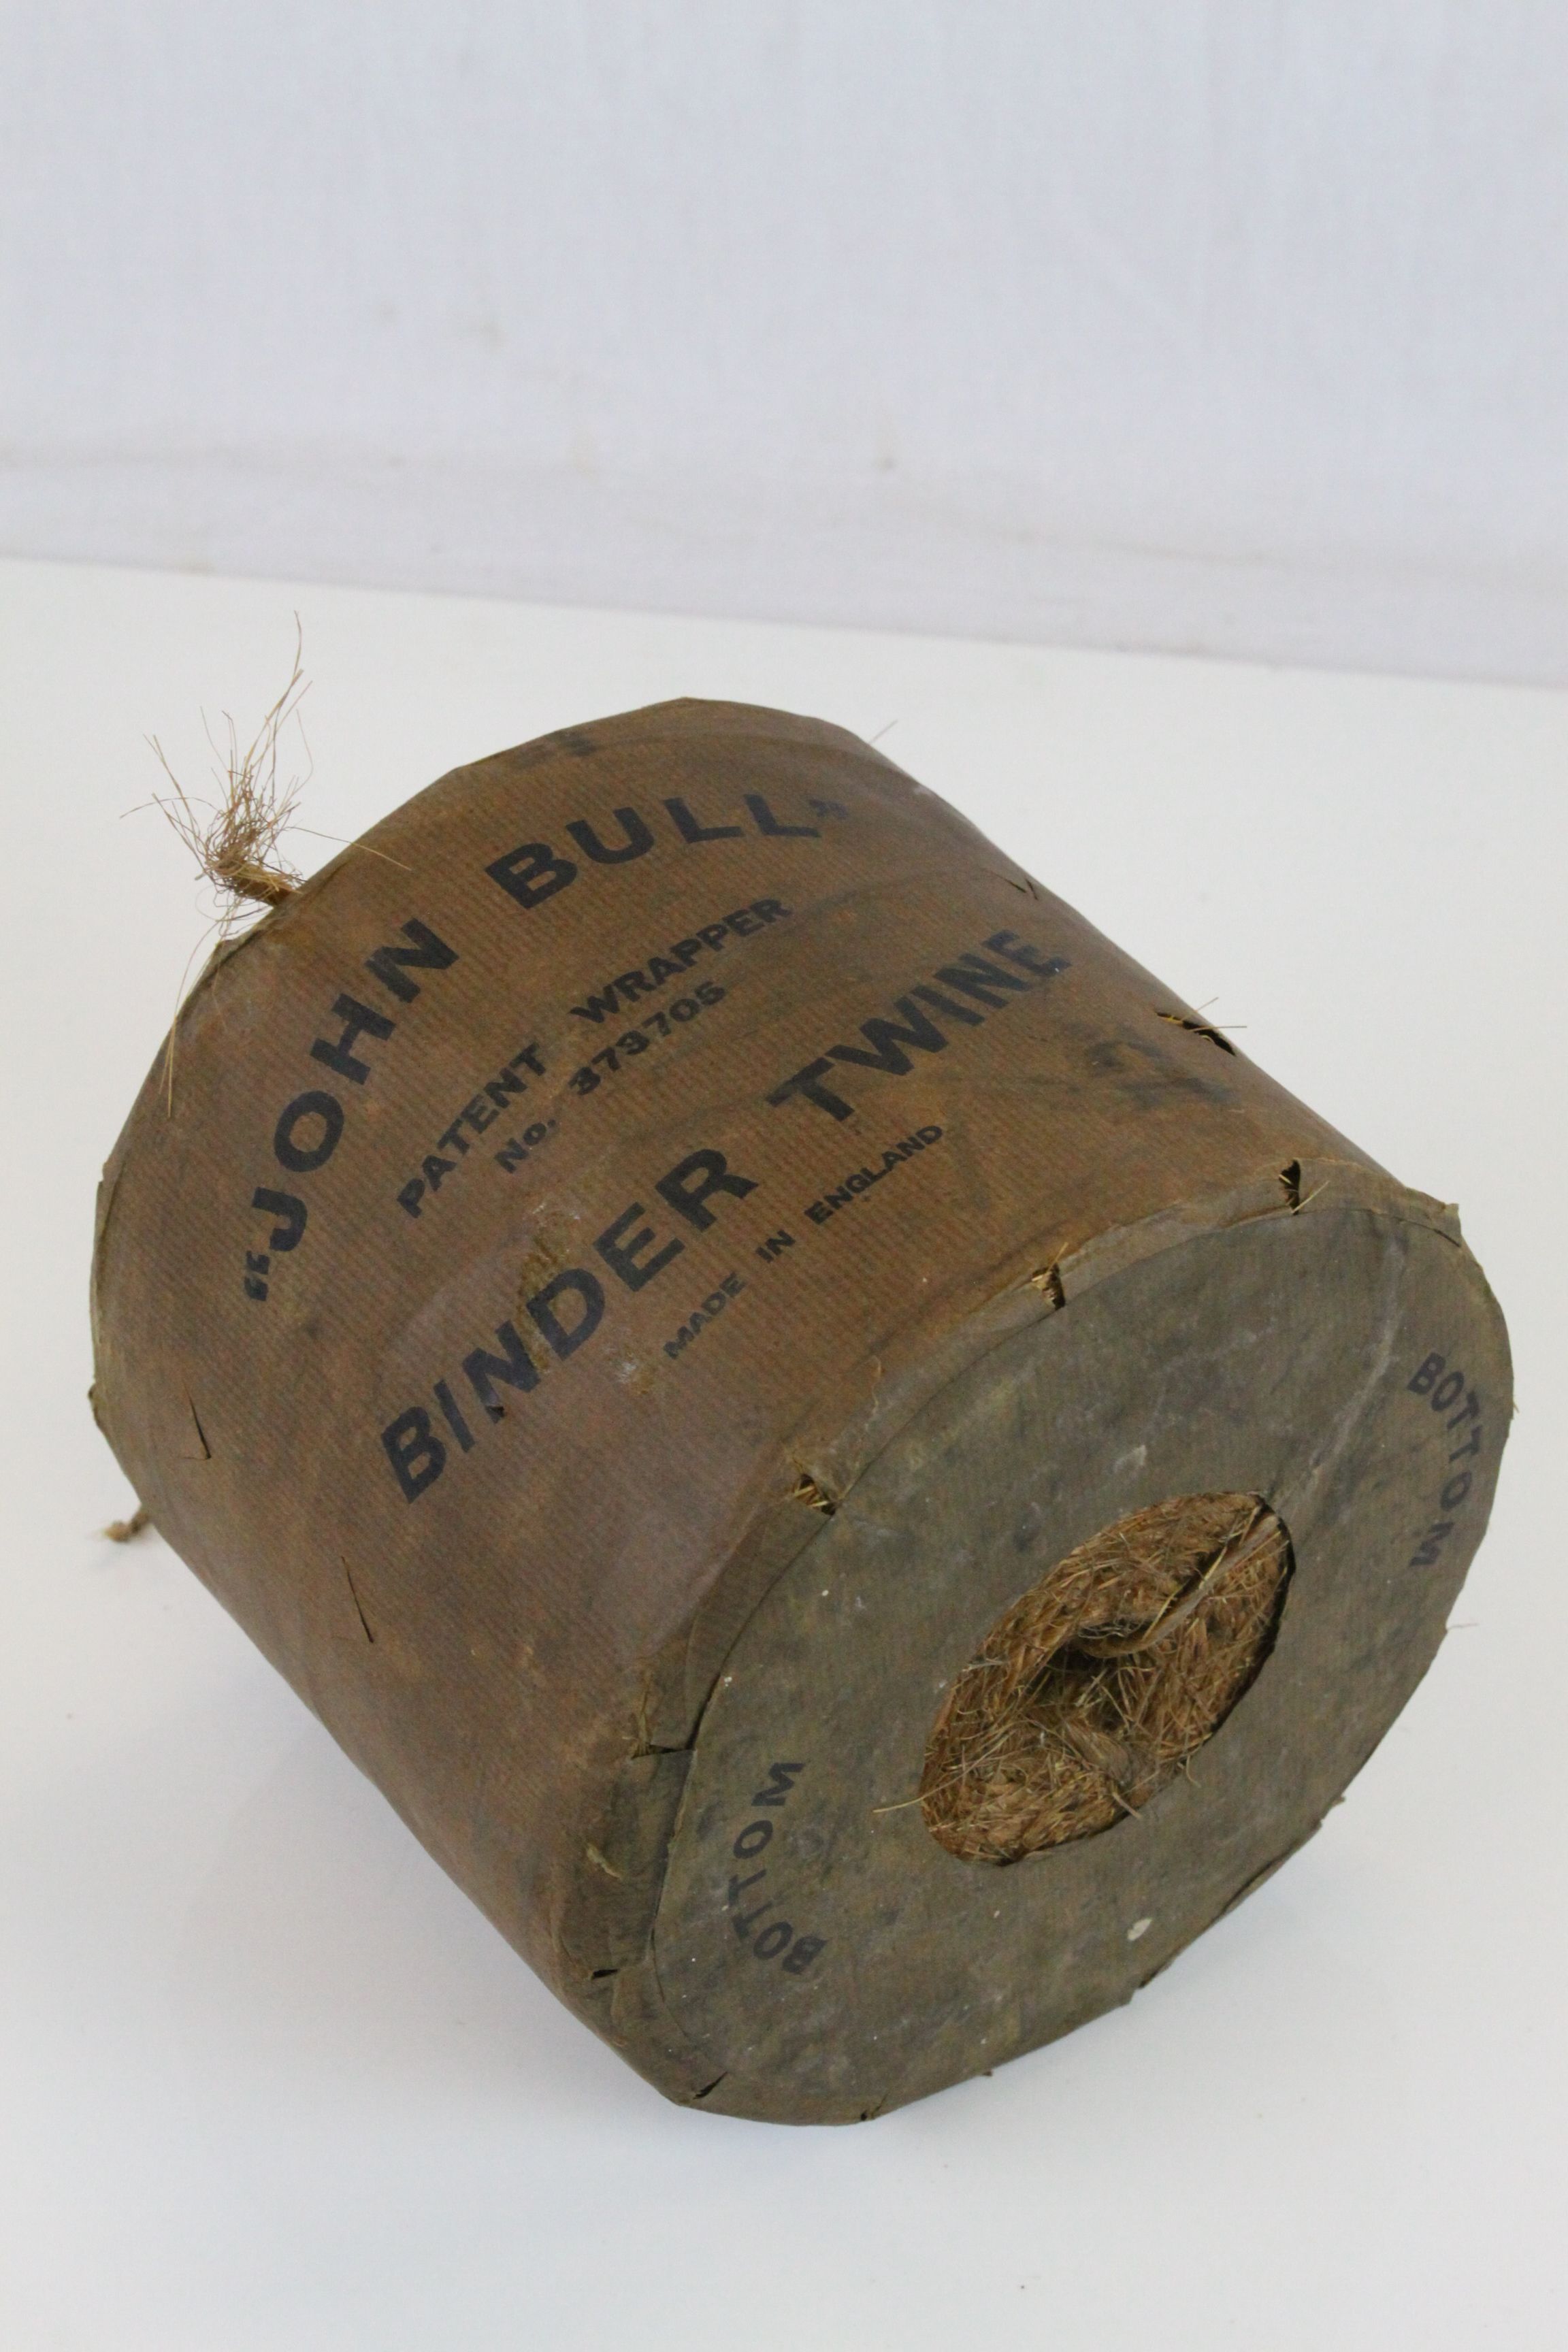 Vintage Wrapped Roll of Binder Twine marked ' John Bull Binder Twine, patent wrapper no. 379705 ' - Image 4 of 4